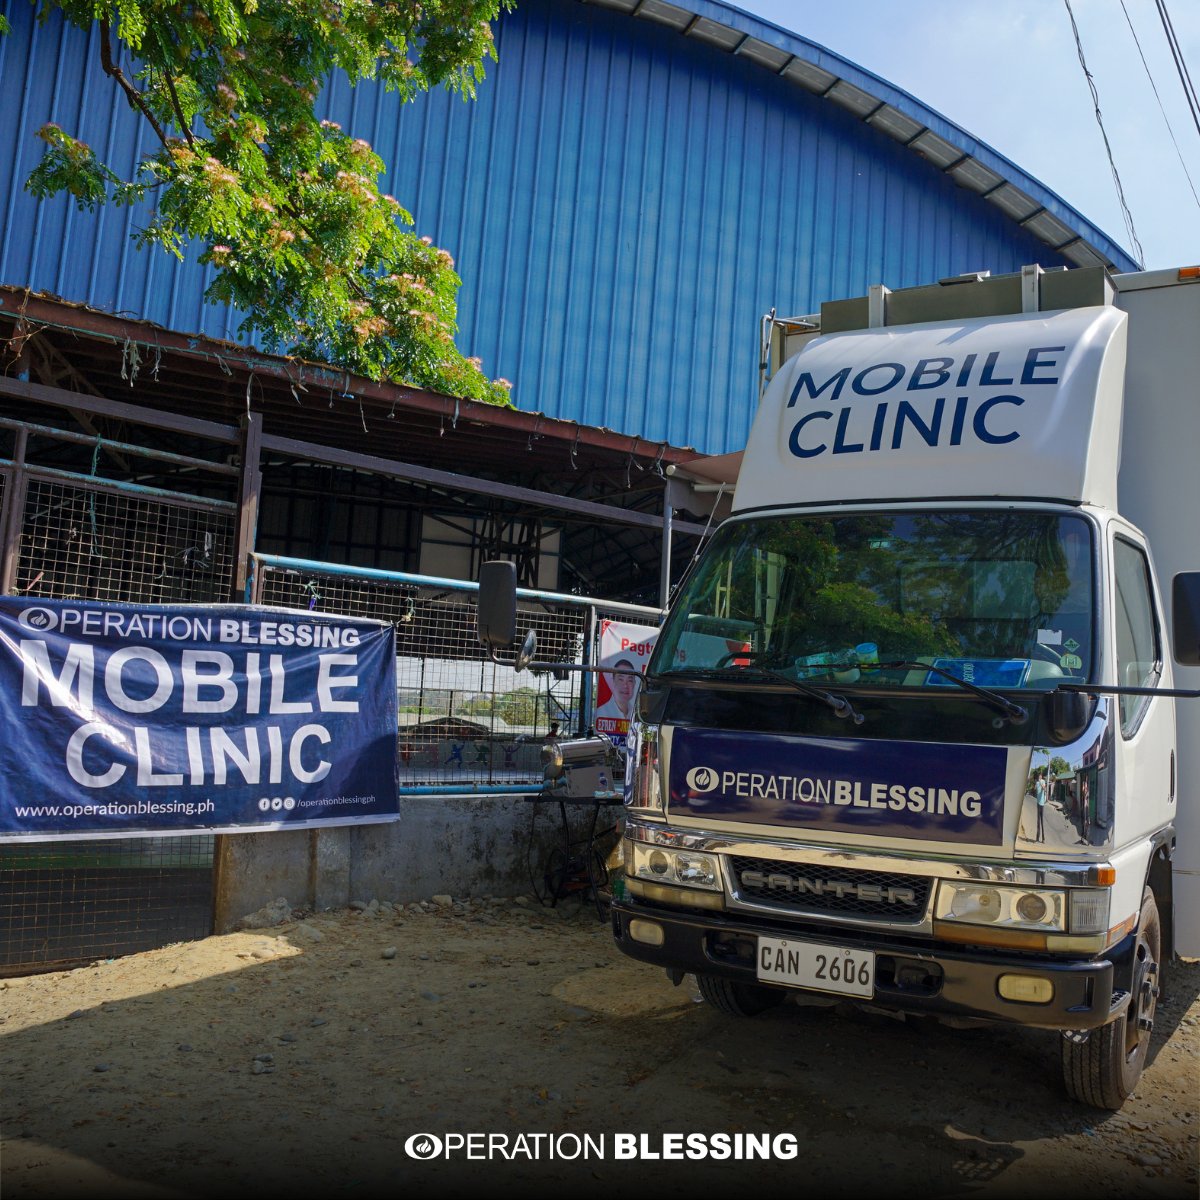 Thanks to your support, our mobile medical clinics are able to provide medical and dental care for residents who cannot access health care services due to poverty or distance from medical facilities. 

#OperationBlessing #MedicalCare #DentalCare